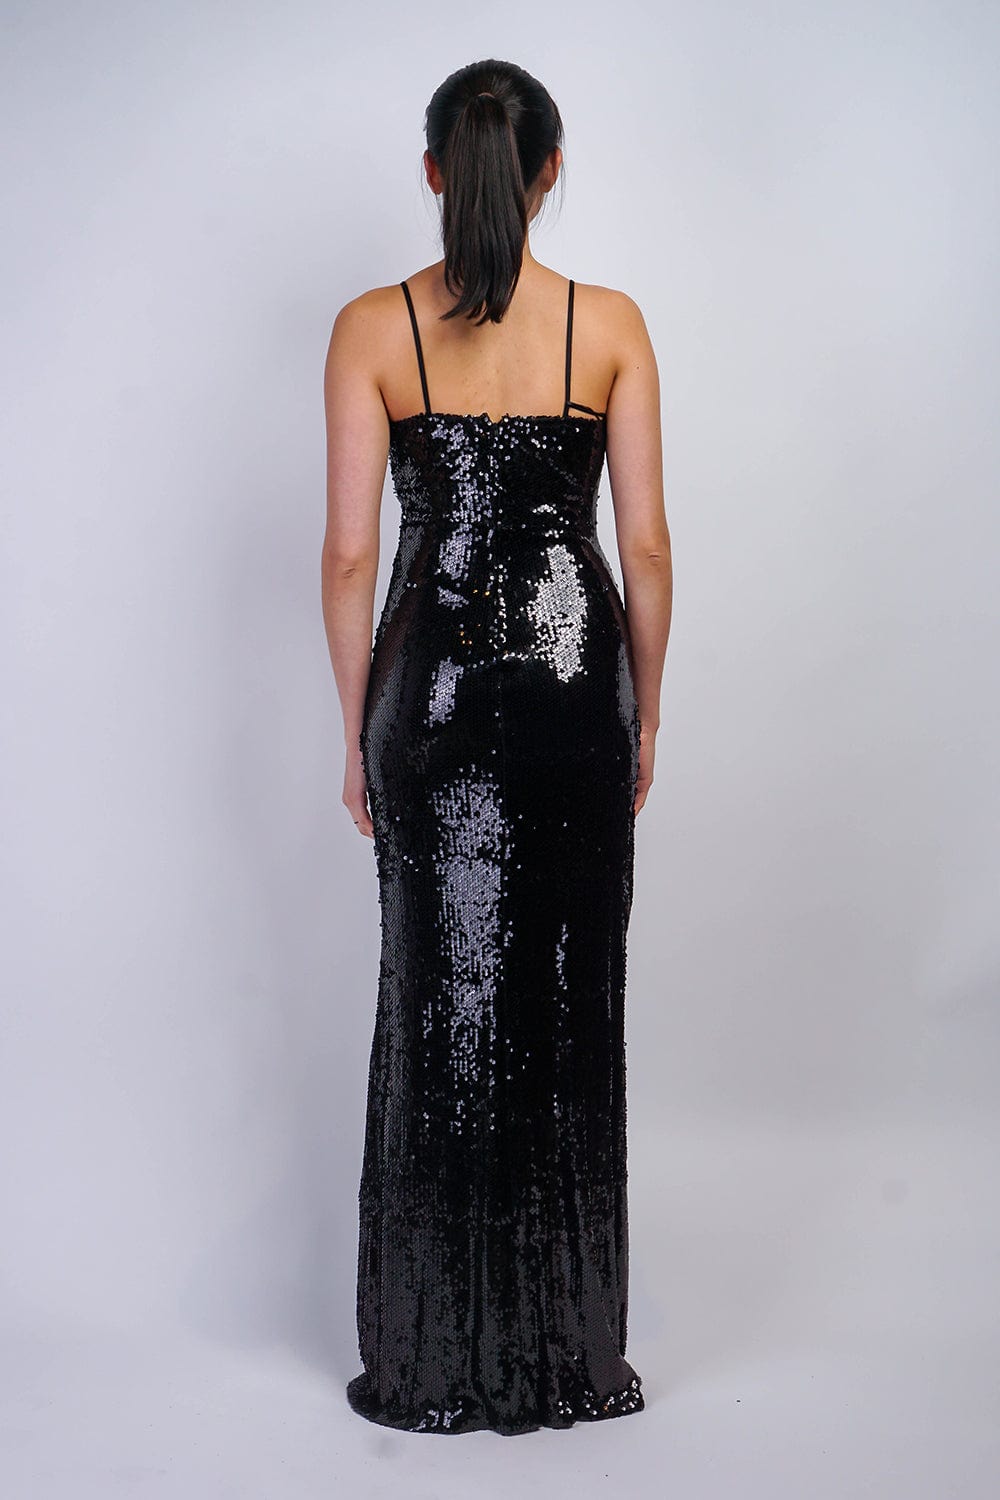 GOWNS Black Sequin High Slit Pleated Gown - Chloe Dao